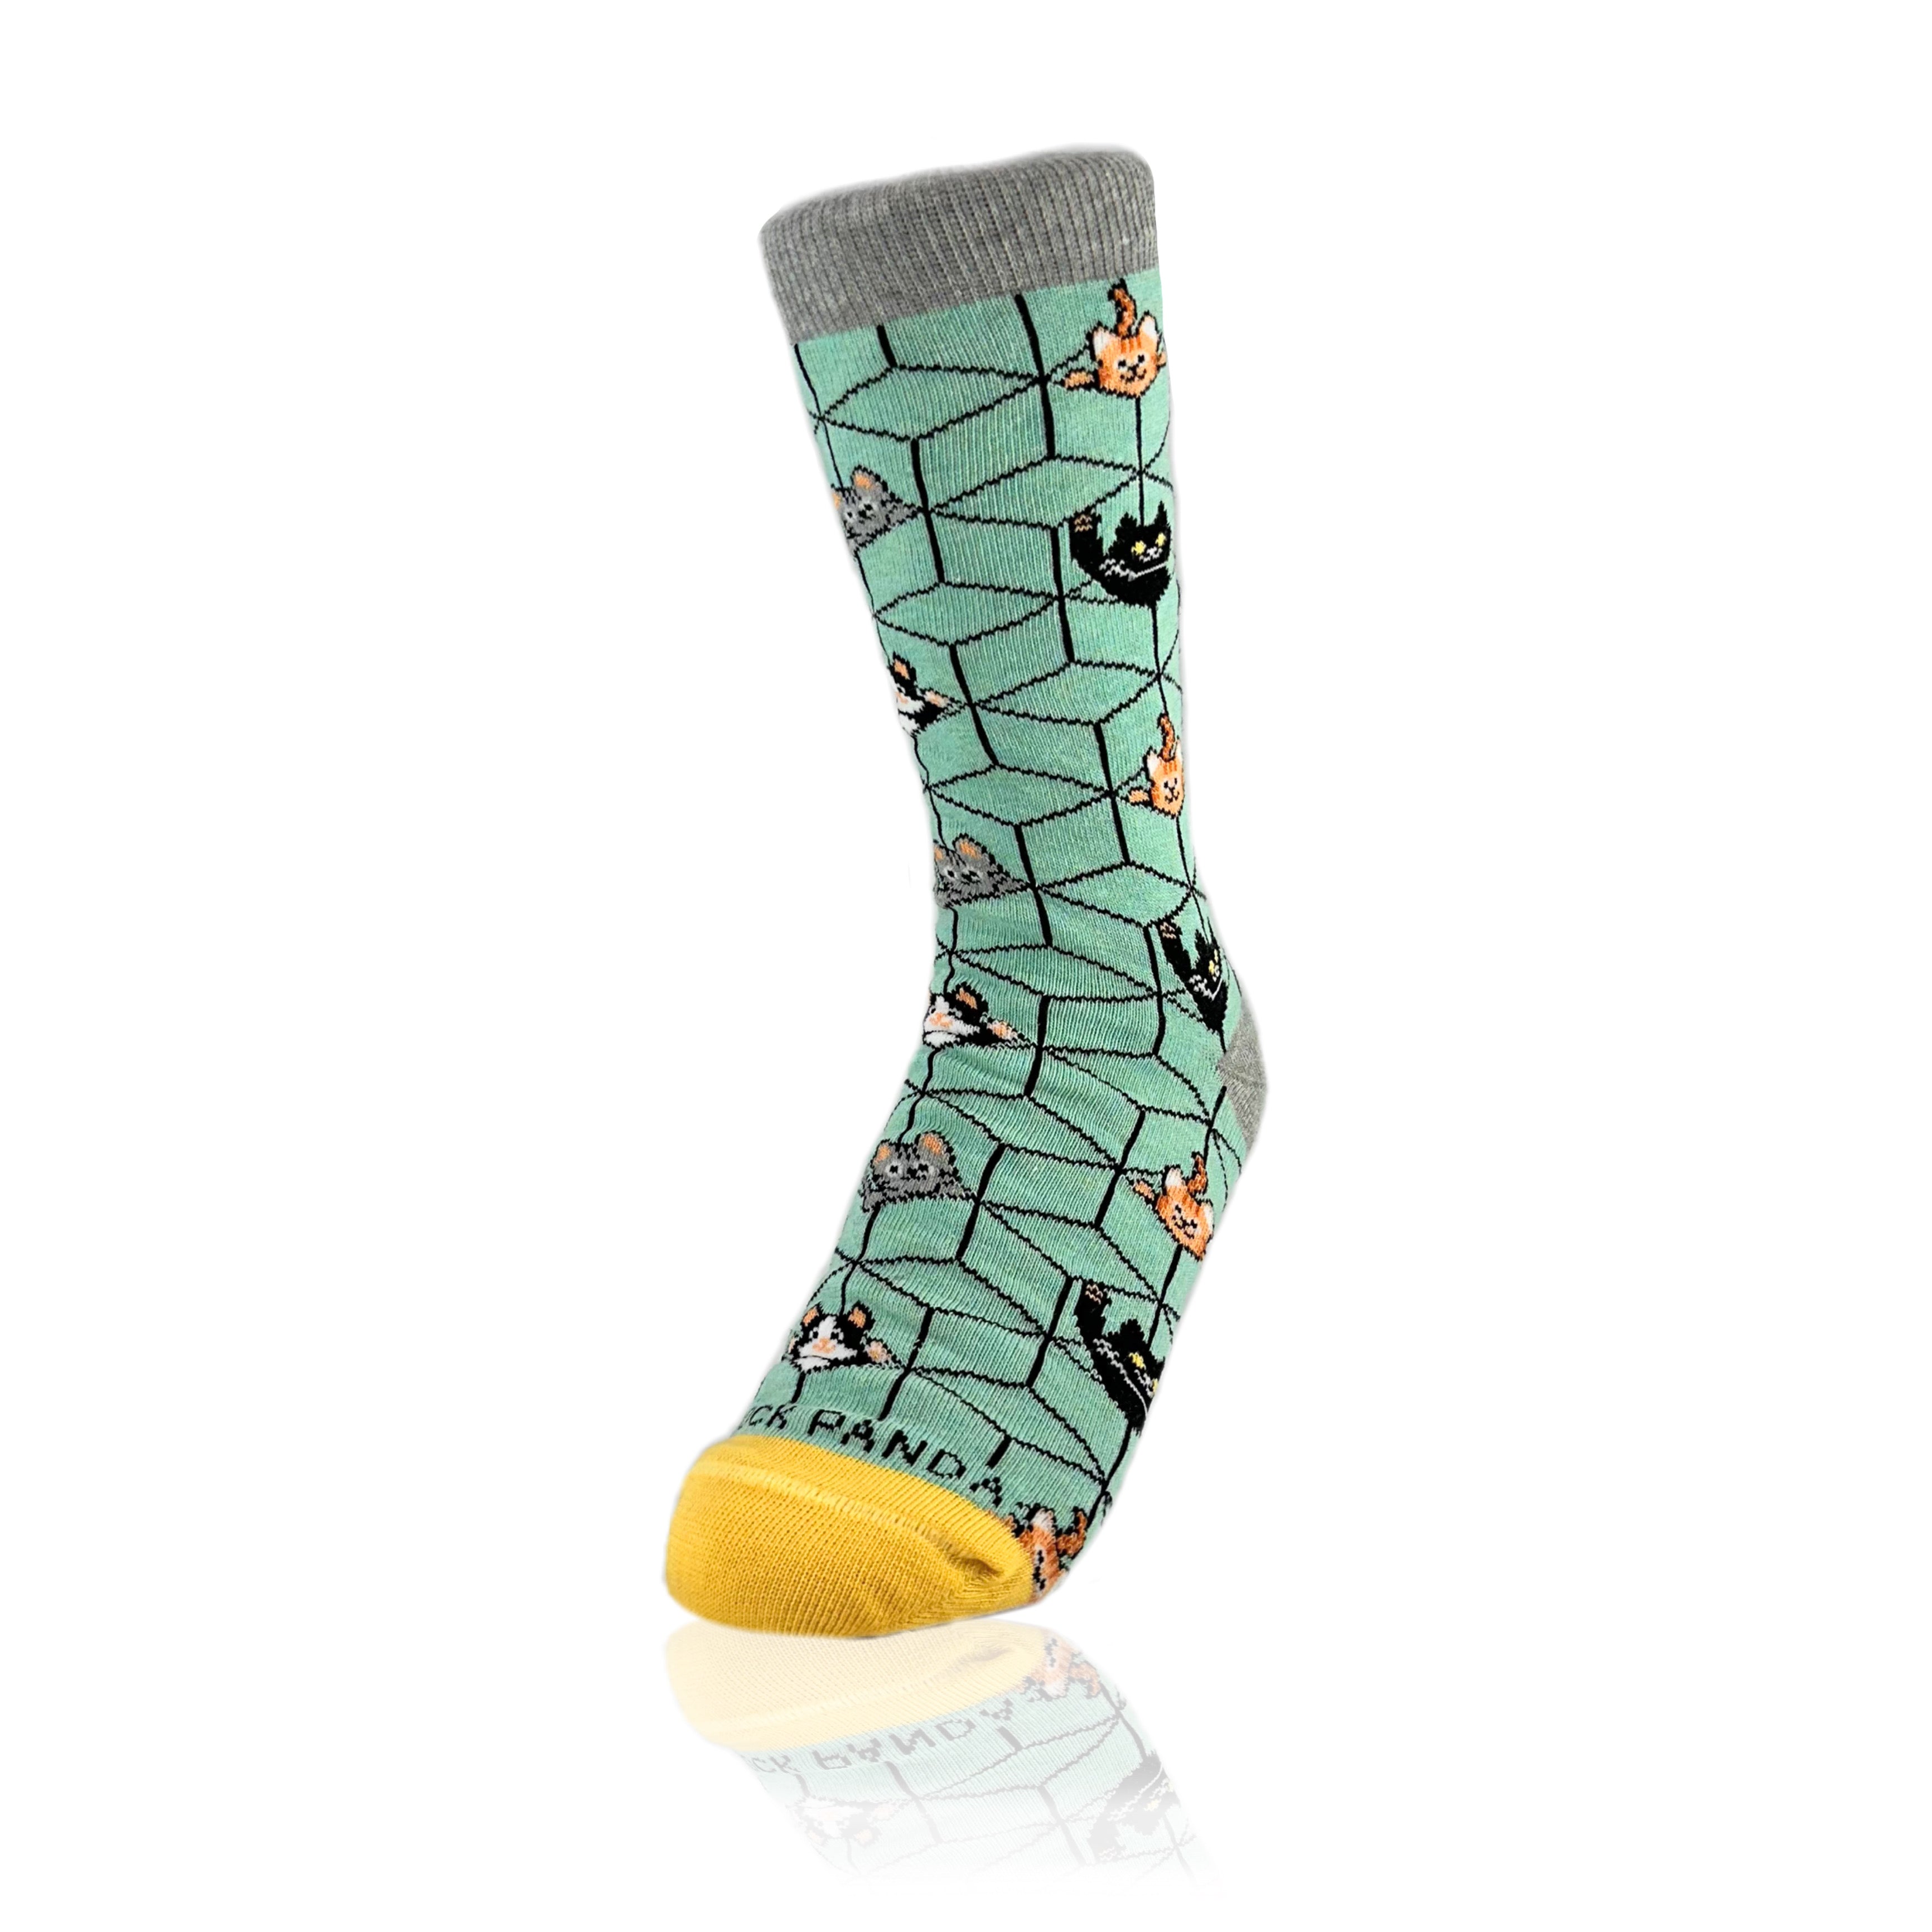 Cats in 3D Socks from the Sock Panda (Adult Small)